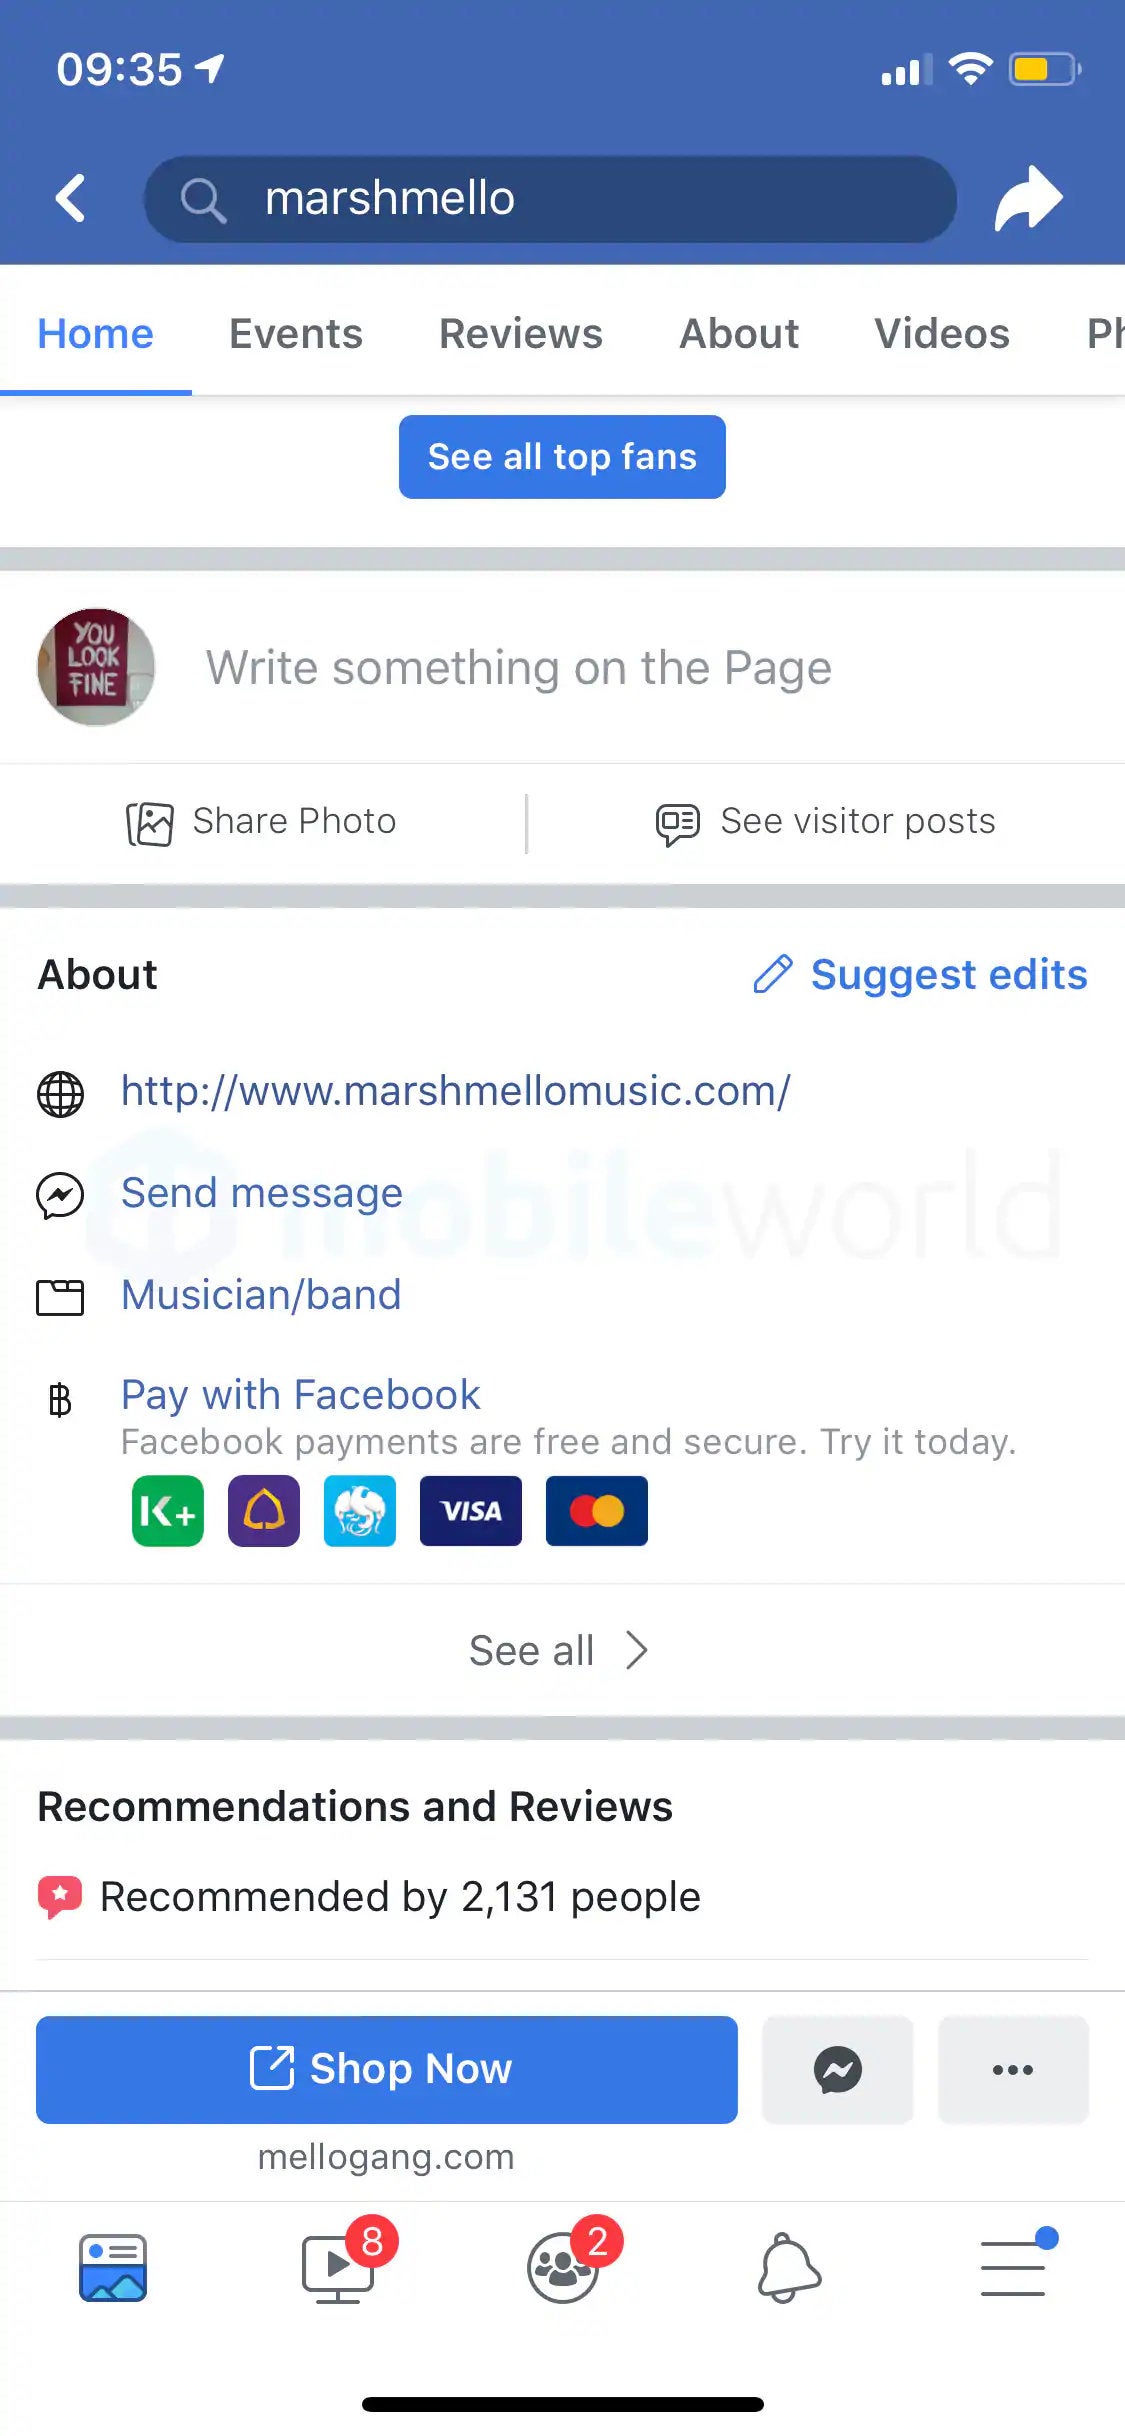 Facebook's unannounced mobile payment service shows up on Android and iOS